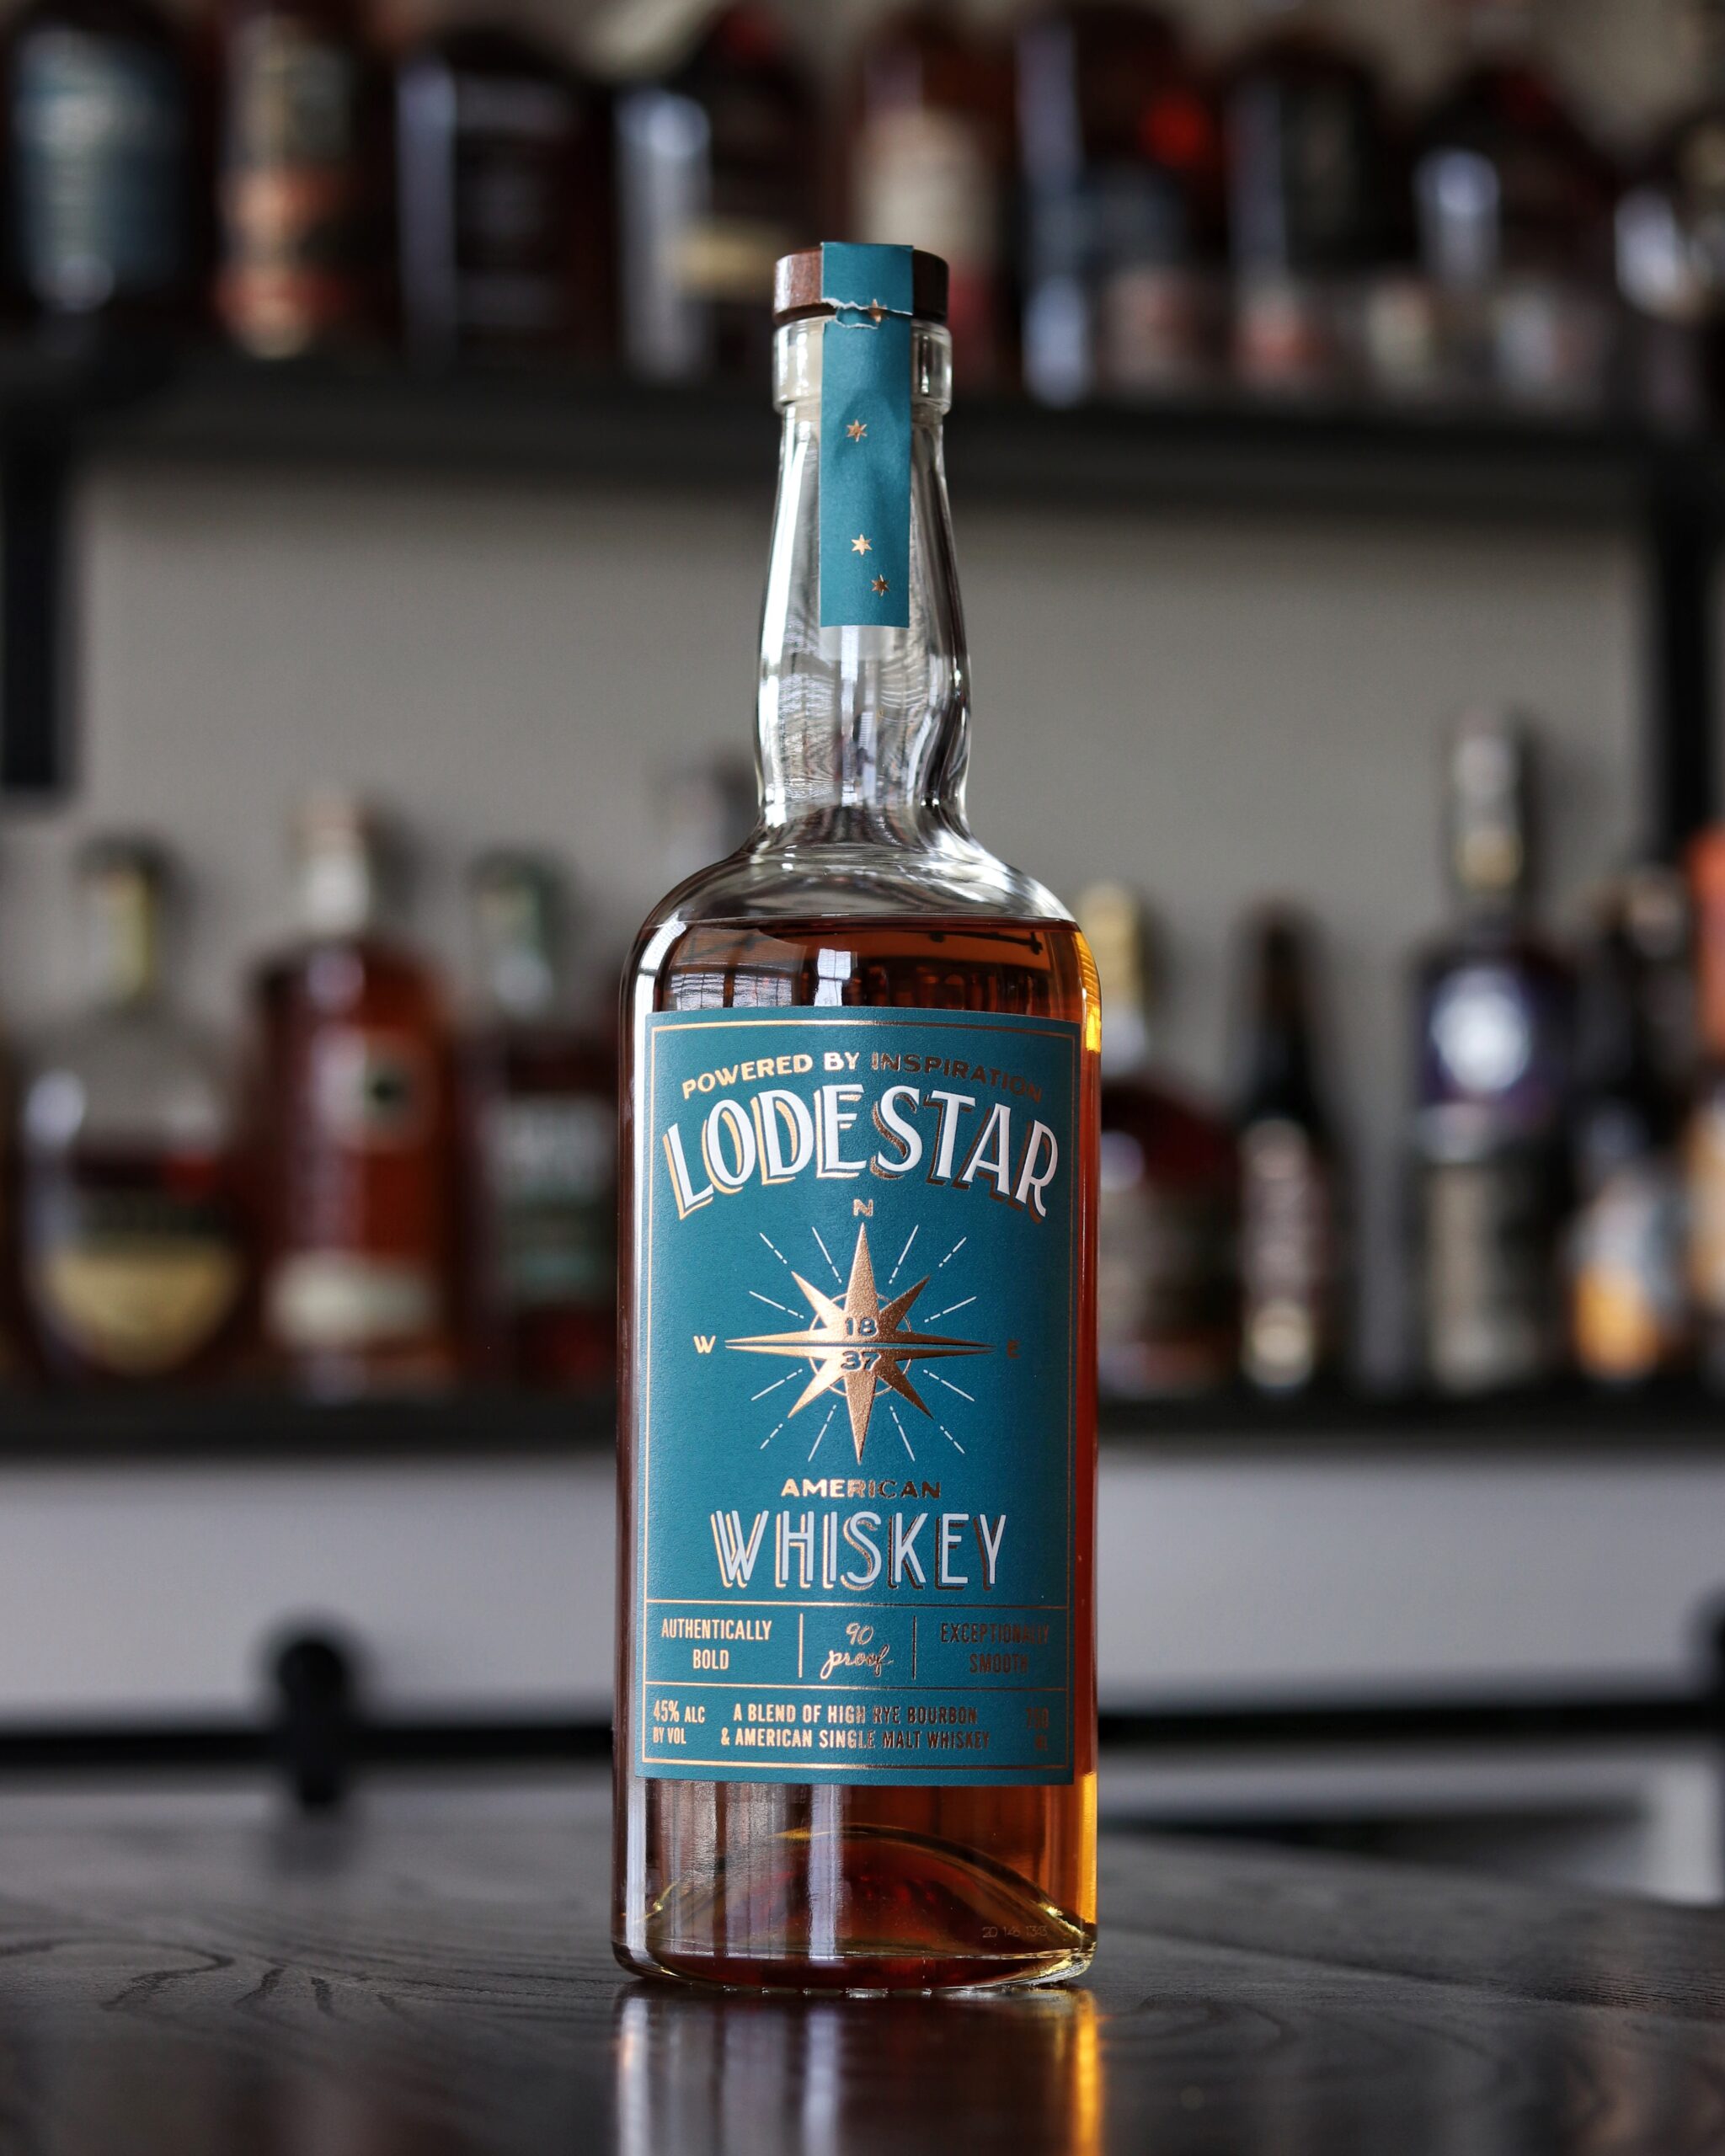 Women-Founded Lodestar Whiskey Launches New, “Unconventional” Whiskey Blend